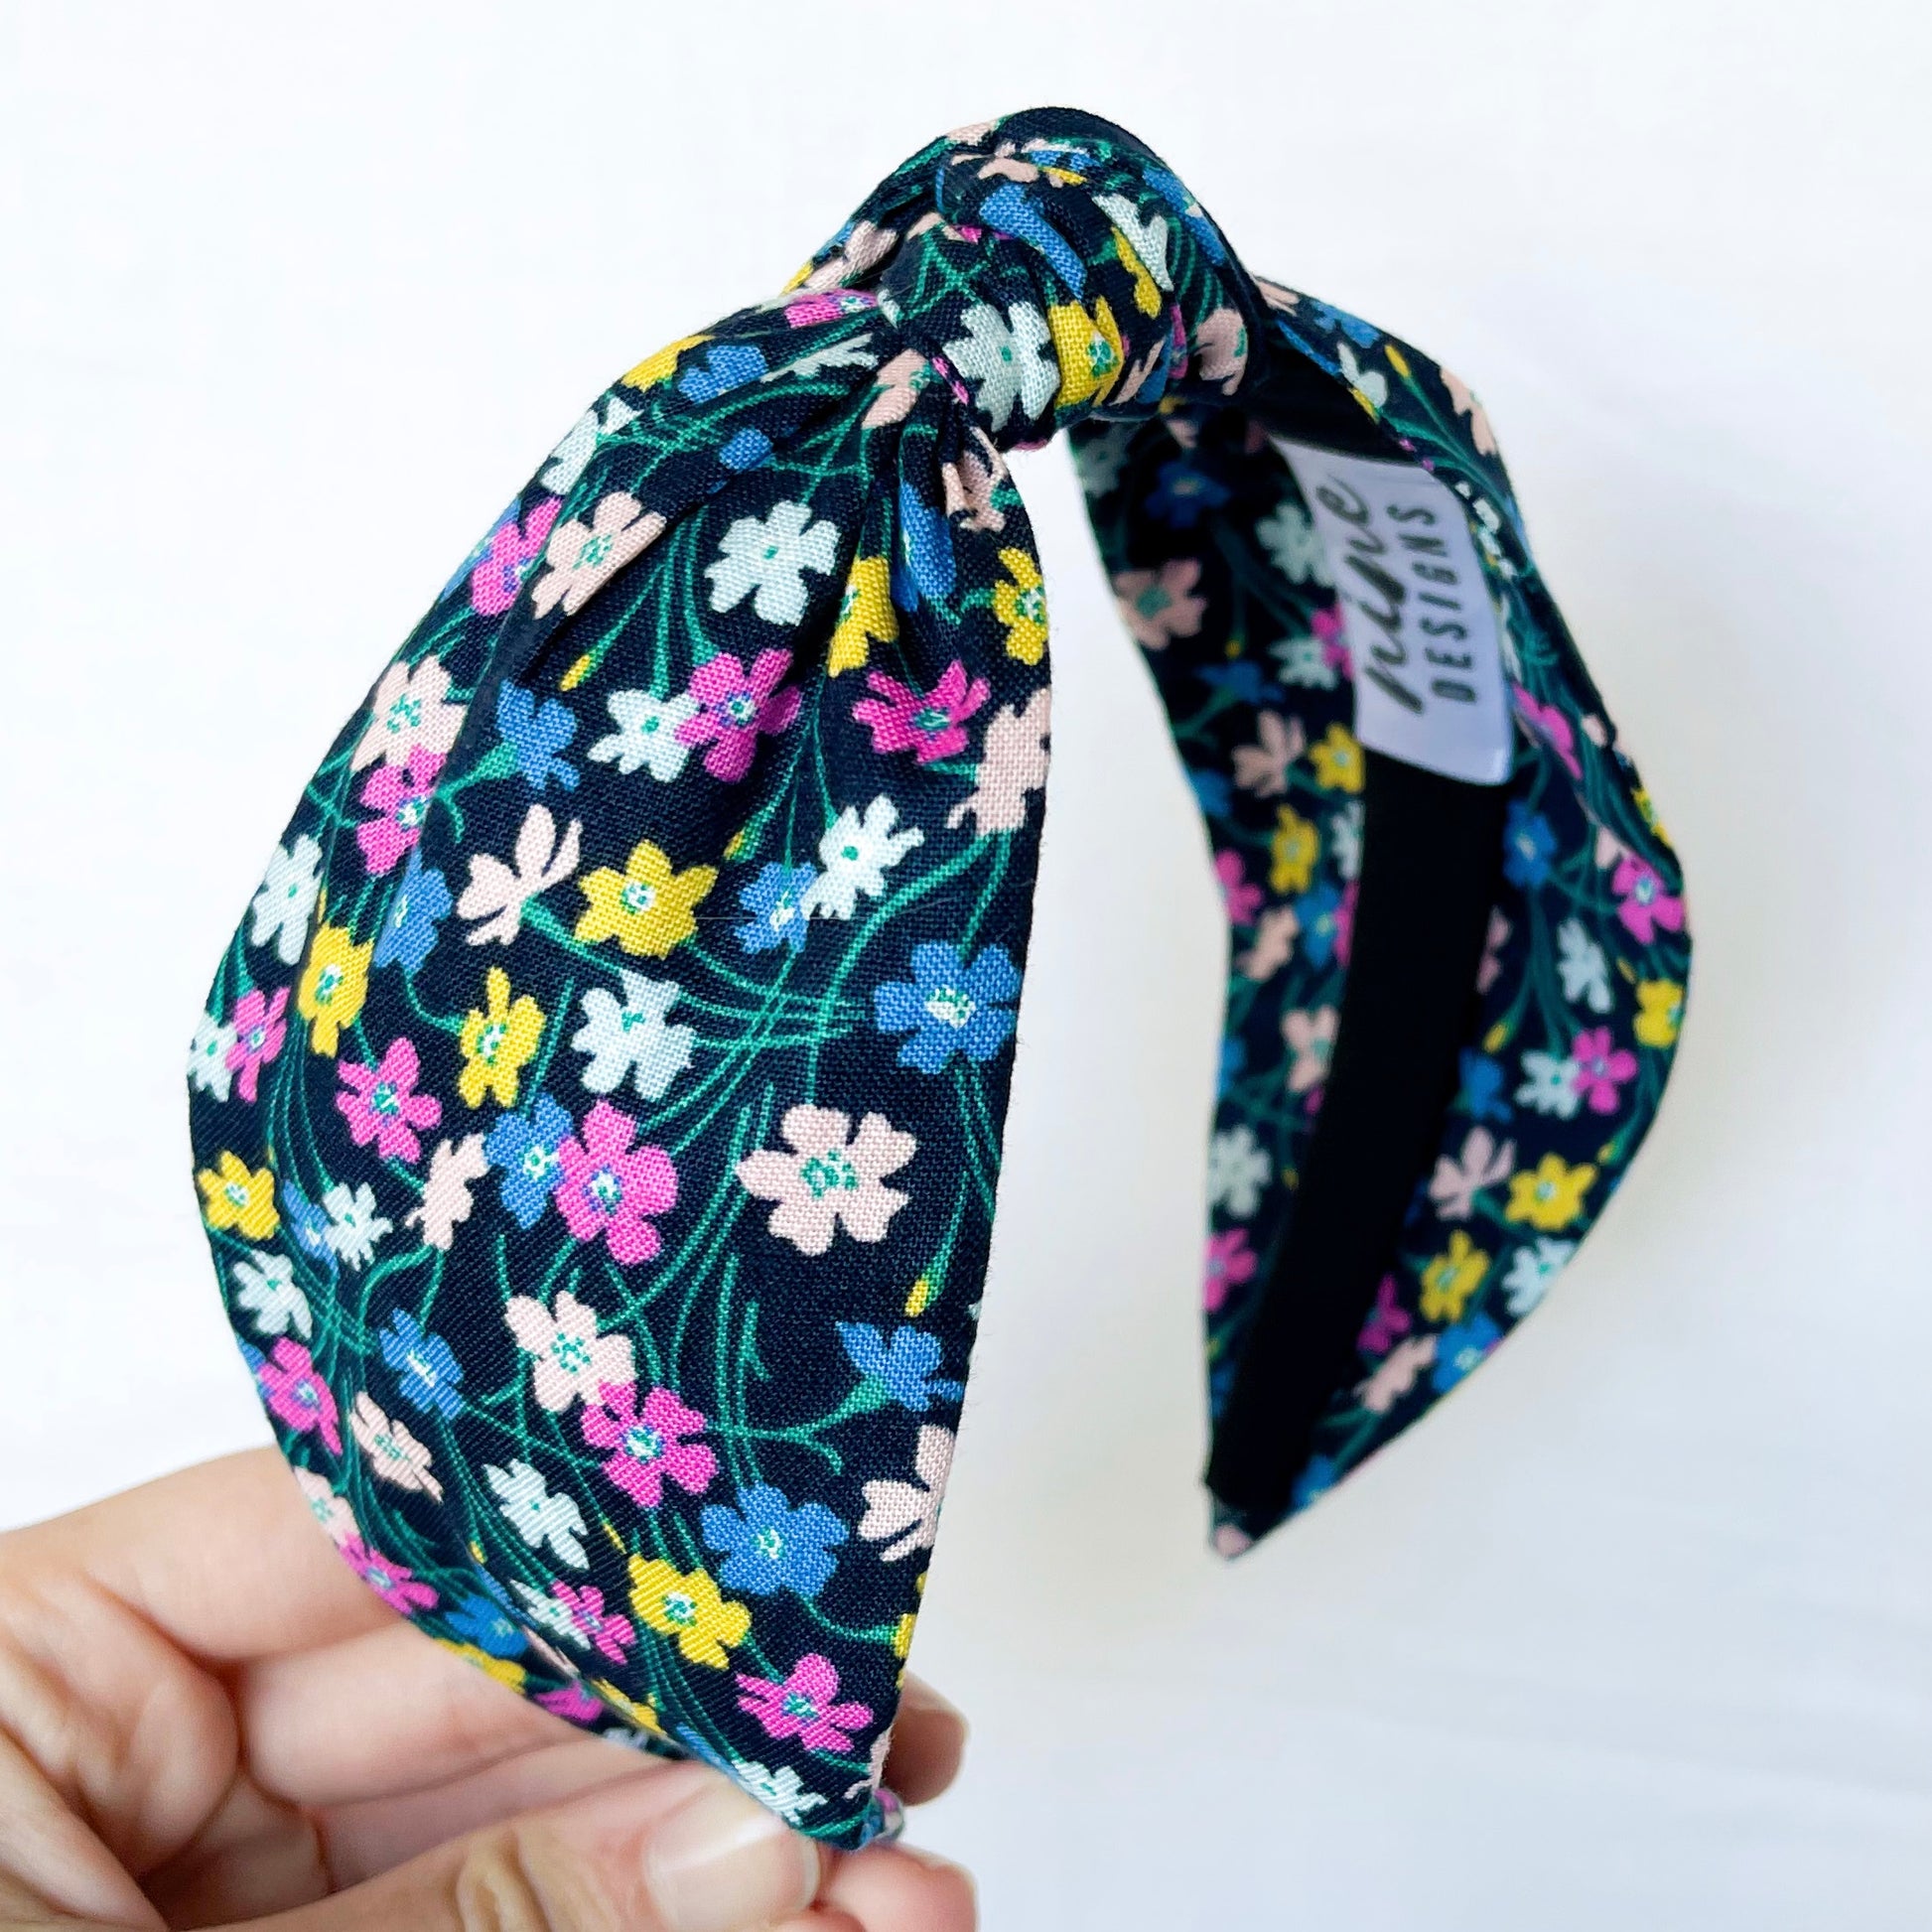 Liberty of london deco dance knot headband, floral hairband for women